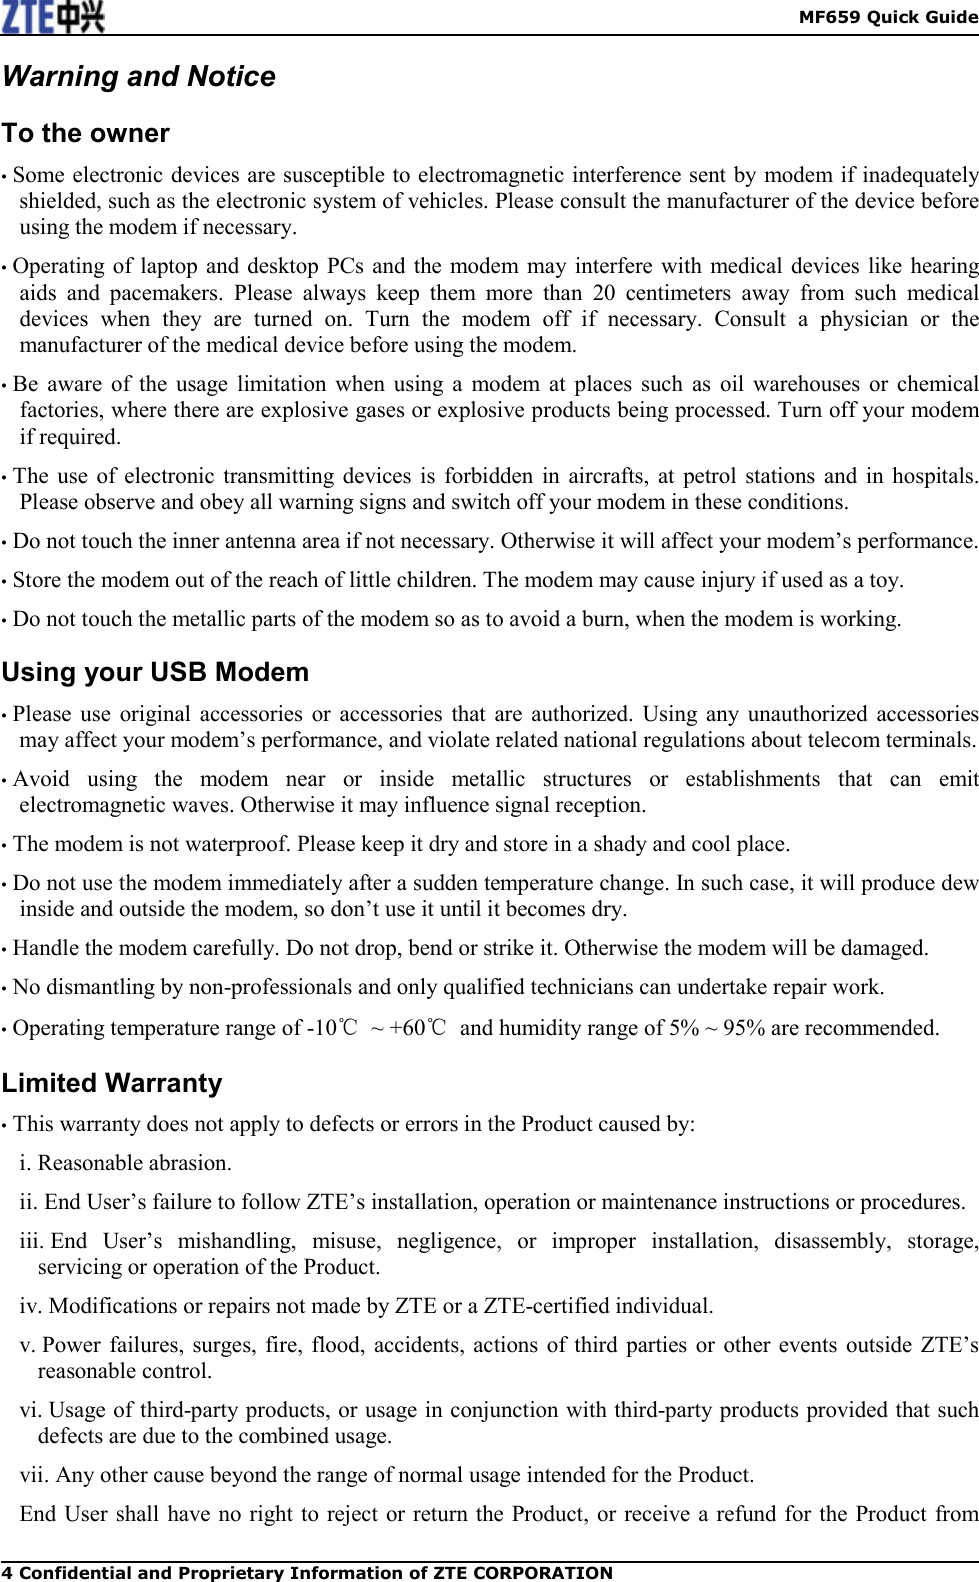    MF659 Quick Guide 4 Confidential and Proprietary Information of ZTE CORPORATION Warning and Notice To the owner • Some electronic devices are susceptible to electromagnetic interference sent by modem if inadequately shielded, such as the electronic system of vehicles. Please consult the manufacturer of the device before using the modem if necessary. • Operating of  laptop and desktop  PCs and  the modem  may interfere  with medical  devices like hearing aids  and  pacemakers.  Please  always  keep  them  more  than  20  centimeters  away  from  such  medical devices  when  they  are  turned  on.  Turn  the  modem  off  if  necessary.  Consult  a  physician  or  the manufacturer of the medical device before using the modem. • Be  aware  of  the  usage  limitation  when  using  a  modem  at  places  such  as  oil  warehouses  or  chemical factories, where there are explosive gases or explosive products being processed. Turn off your modem if required. • The  use  of  electronic  transmitting  devices  is  forbidden in  aircrafts,  at  petrol  stations  and  in  hospitals. Please observe and obey all warning signs and switch off your modem in these conditions. • Do not touch the inner antenna area if not necessary. Otherwise it will affect your modem’s performance. • Store the modem out of the reach of little children. The modem may cause injury if used as a toy. • Do not touch the metallic parts of the modem so as to avoid a burn, when the modem is working. Using your USB Modem • Please  use  original  accessories  or  accessories  that  are  authorized.  Using  any unauthorized  accessories may affect your modem’s performance, and violate related national regulations about telecom terminals. • Avoid  using  the  modem  near  or  inside  metallic  structures  or  establishments  that  can  emit electromagnetic waves. Otherwise it may influence signal reception. • The modem is not waterproof. Please keep it dry and store in a shady and cool place. • Do not use the modem immediately after a sudden temperature change. In such case, it will produce dew inside and outside the modem, so don’t use it until it becomes dry. • Handle the modem carefully. Do not drop, bend or strike it. Otherwise the modem will be damaged. • No dismantling by non-professionals and only qualified technicians can undertake repair work. • Operating temperature range of -10℃  ~ +60℃  and humidity range of 5% ~ 95% are recommended. Limited Warranty • This warranty does not apply to defects or errors in the Product caused by: i. Reasonable abrasion. ii. End User’s failure to follow ZTE’s installation, operation or maintenance instructions or procedures. iii. End  User’s  mishandling,  misuse,  negligence,  or  improper  installation,  disassembly,  storage, servicing or operation of the Product. iv. Modifications or repairs not made by ZTE or a ZTE-certified individual. v. Power failures, surges, fire,  flood,  accidents,  actions of  third  parties or  other  events  outside ZTE’s reasonable control. vi. Usage of third-party products, or usage in conjunction with third-party products provided that such defects are due to the combined usage. vii. Any other cause beyond the range of normal usage intended for the Product. End User shall have no right to reject  or return the Product, or receive a refund for the Product from 